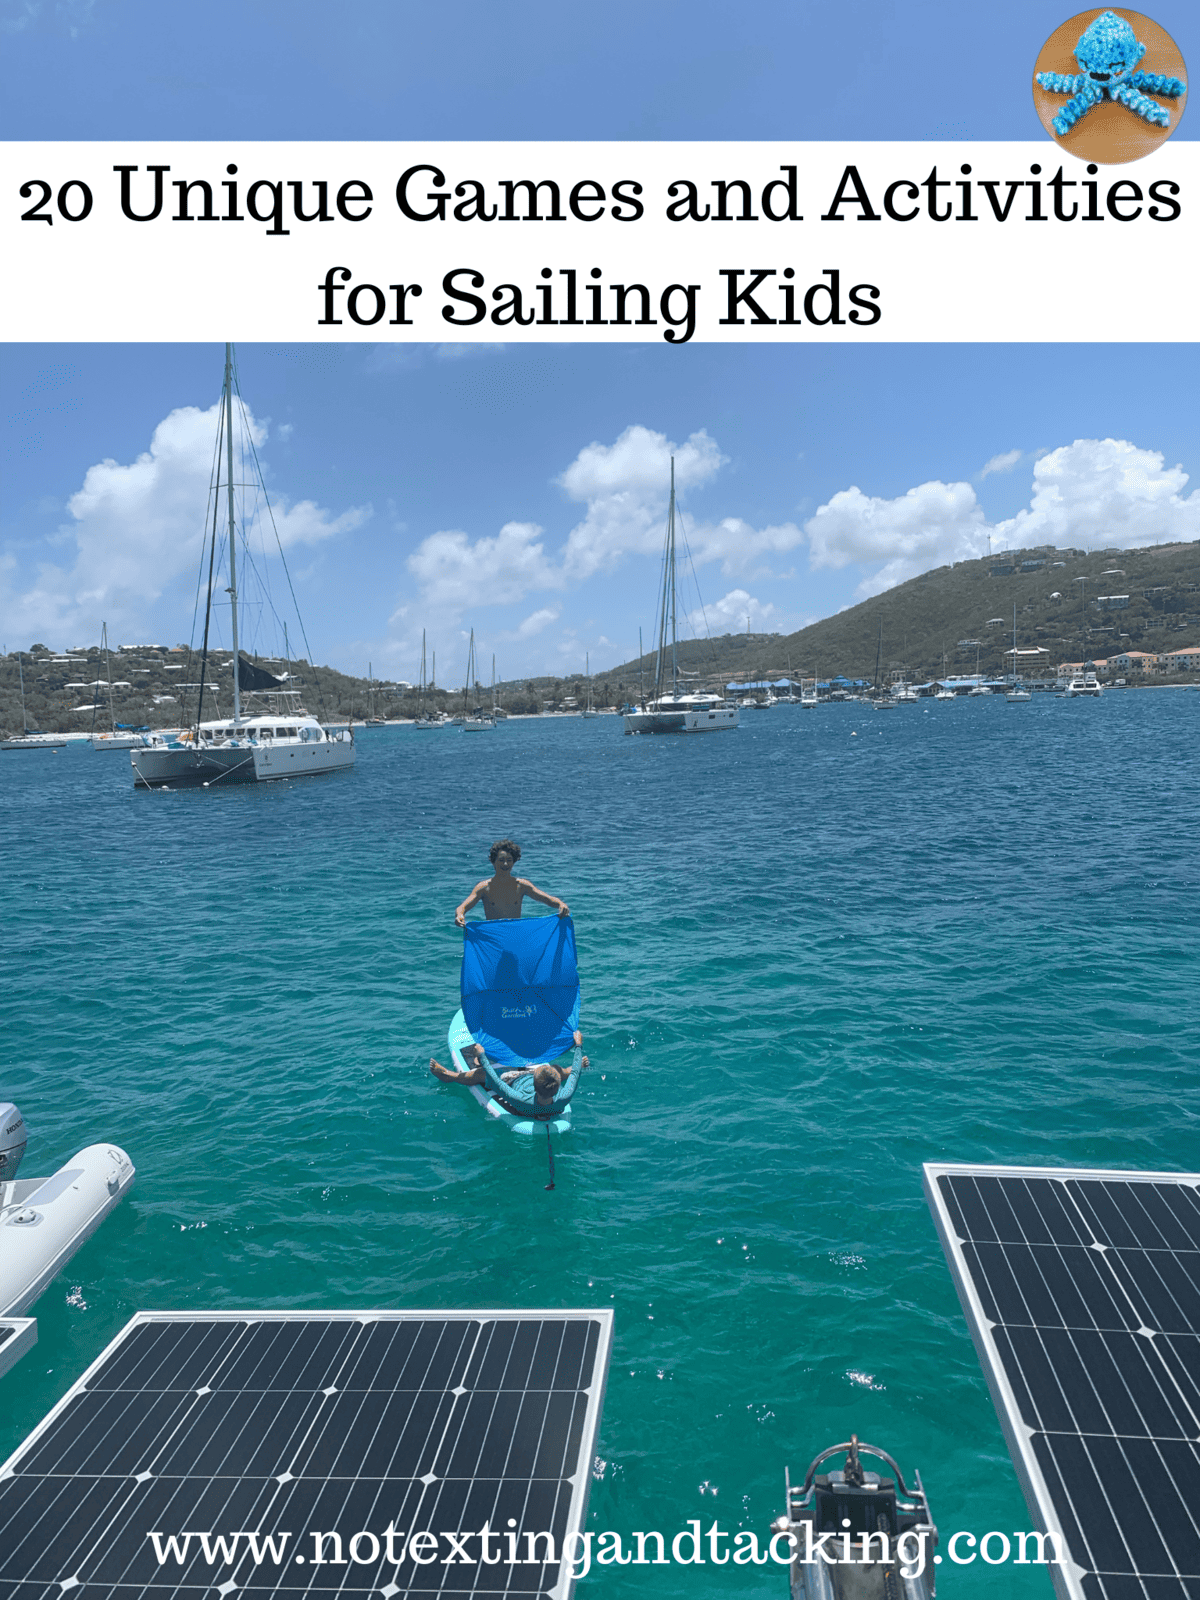 20 Games and activities for sailing kids pin for pinterest